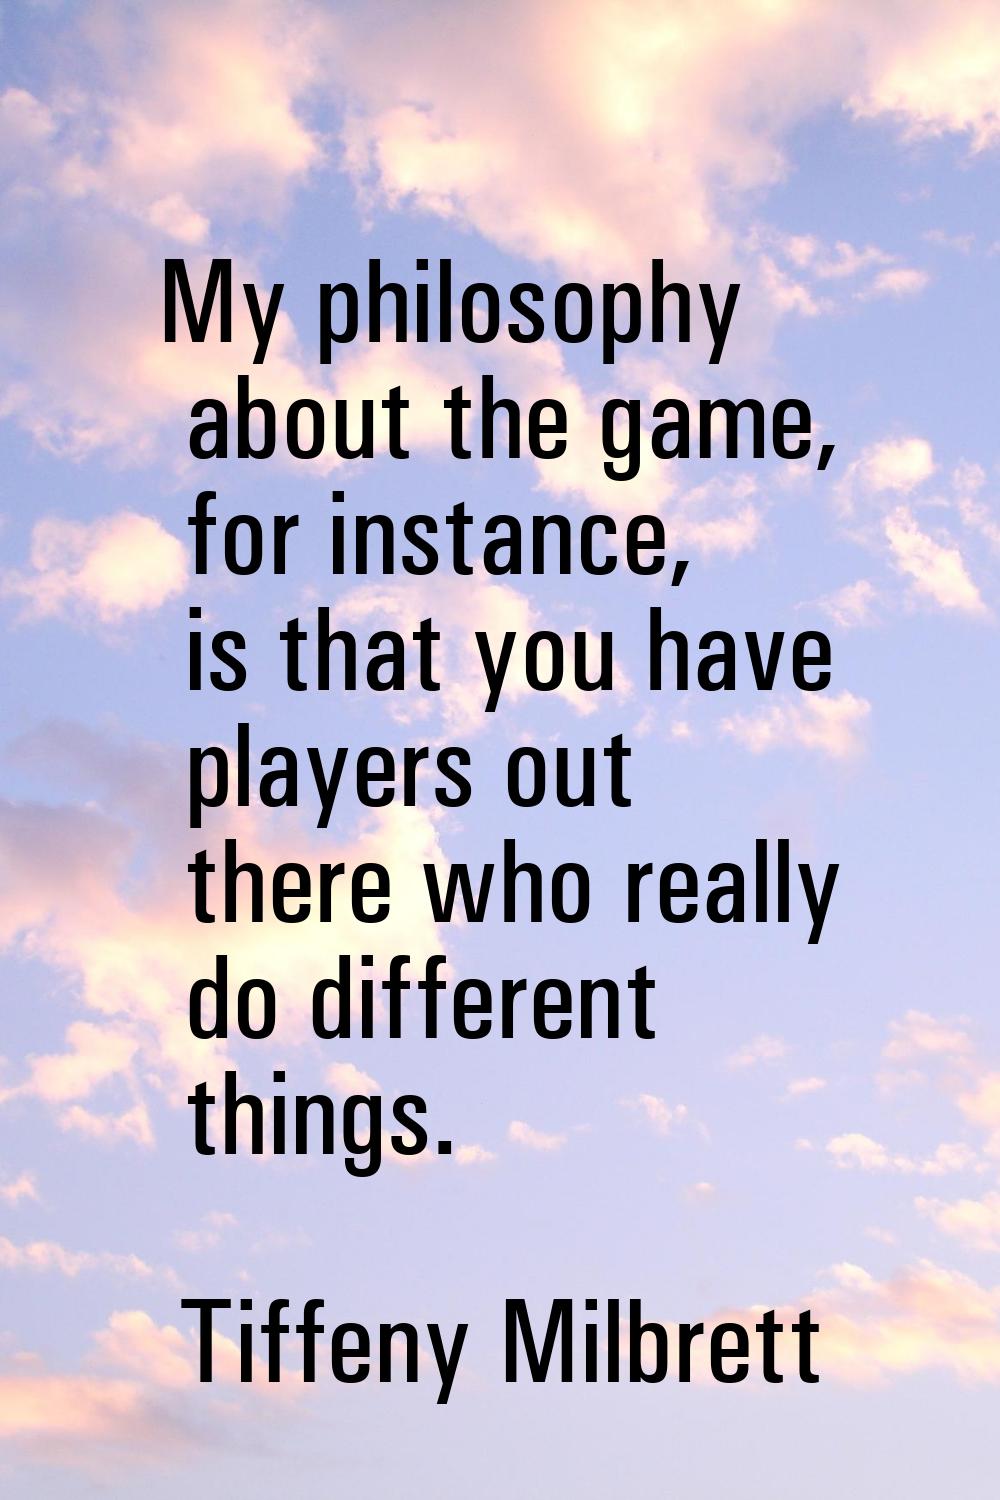 My philosophy about the game, for instance, is that you have players out there who really do differ